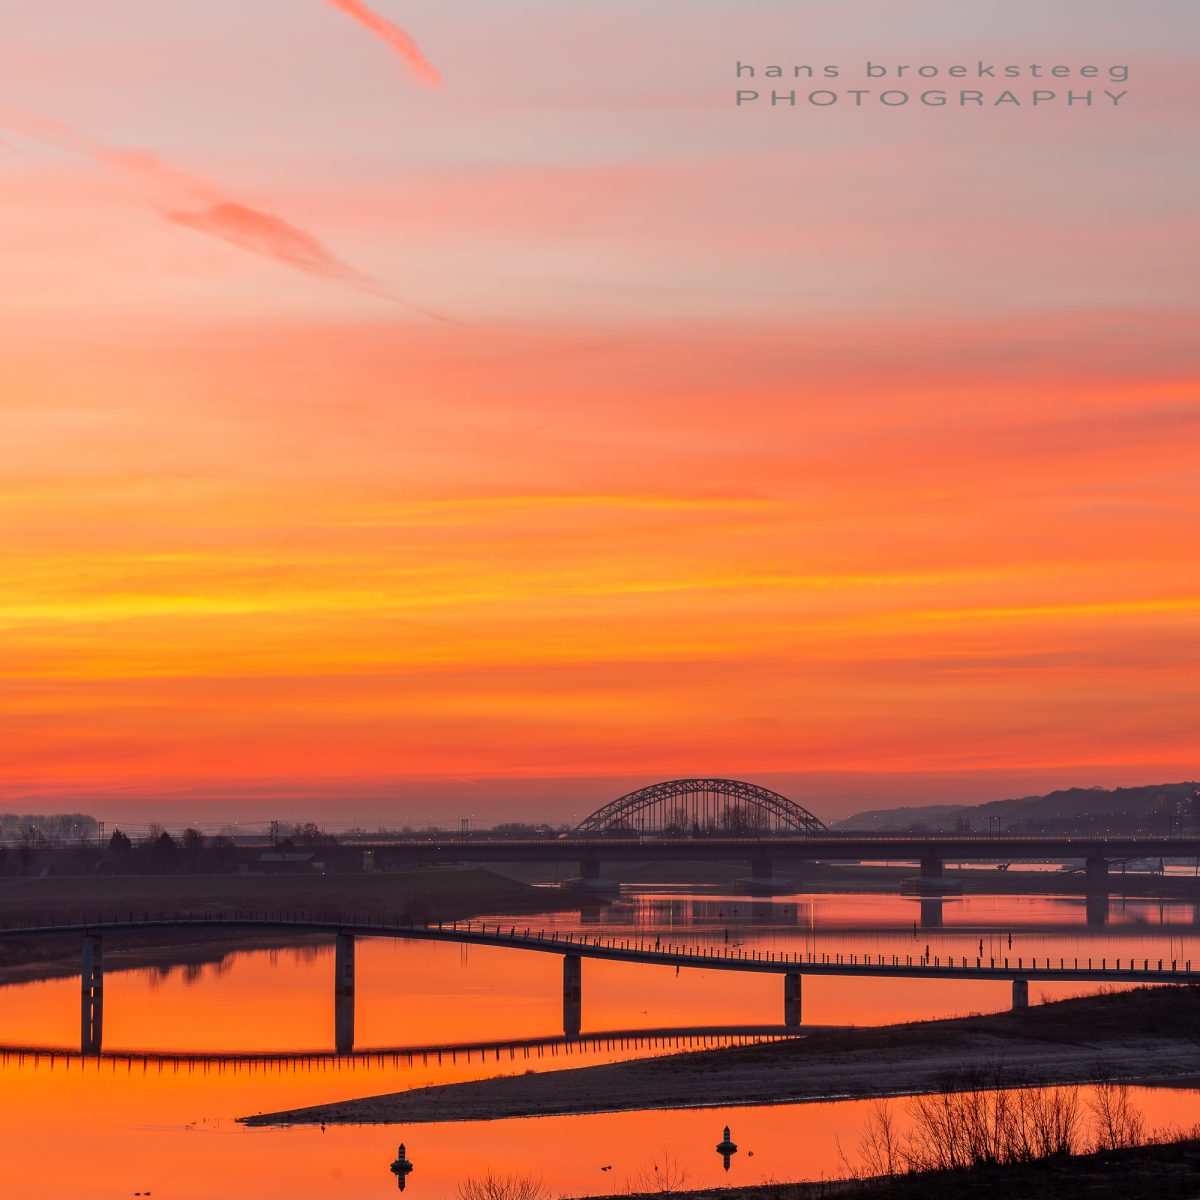 Morning view with amazing red sky over the Waal river, Nijmegen